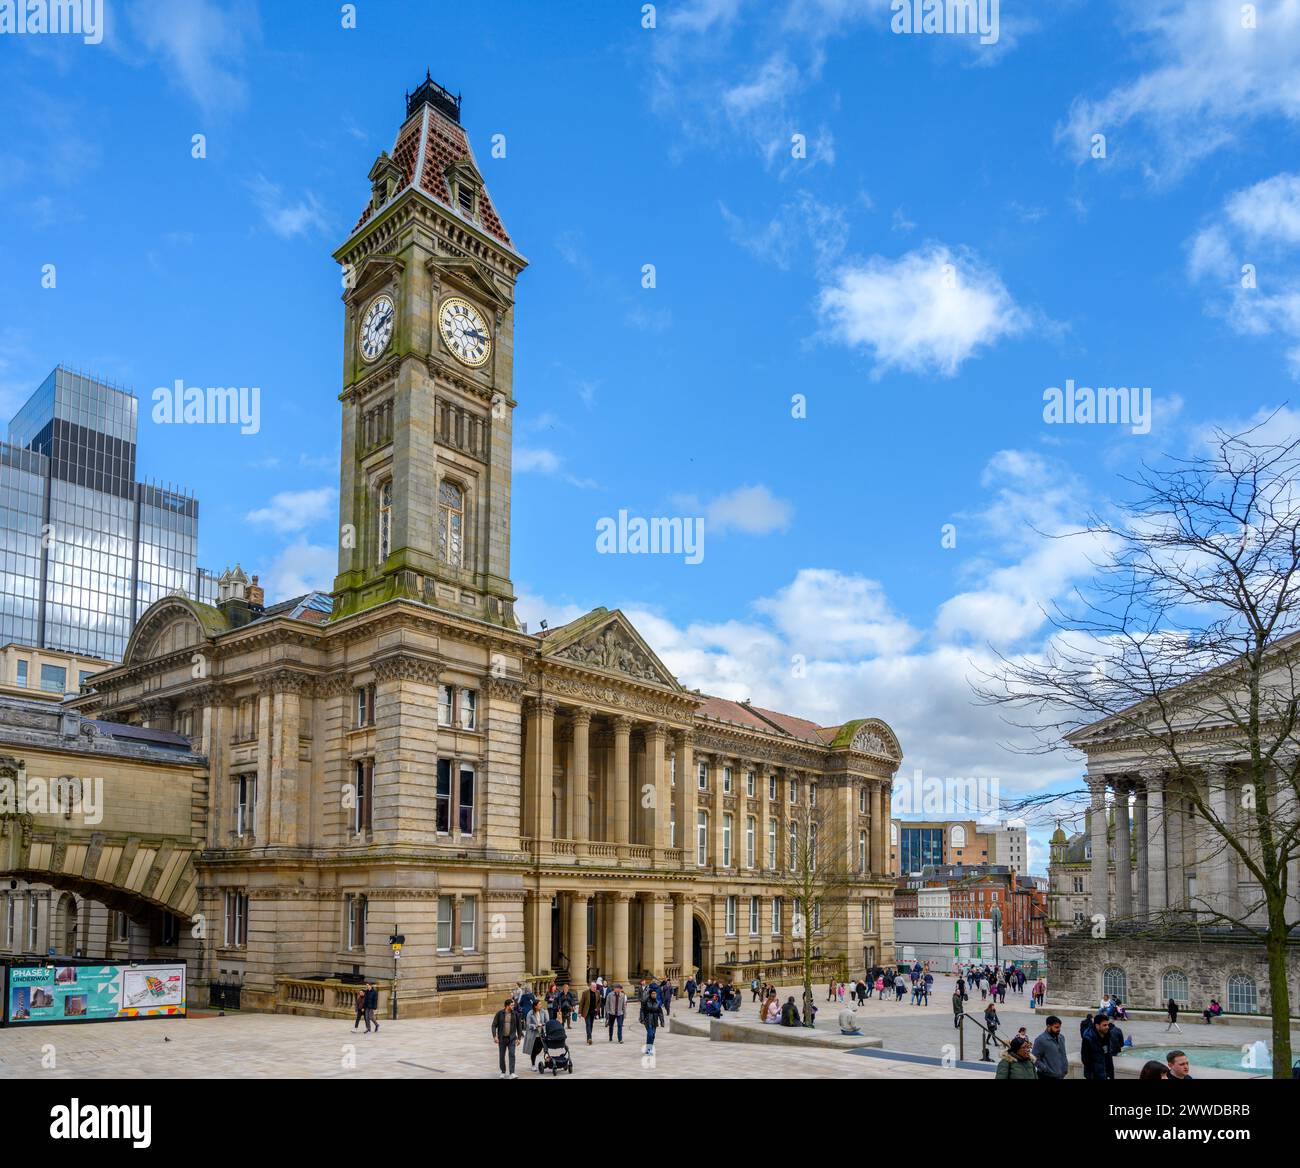 Le Birmingham Museum and Art Gallery, Chamberlain Square, Birmingham, West Midlands, Angleterre, ROYAUME-UNI Banque D'Images